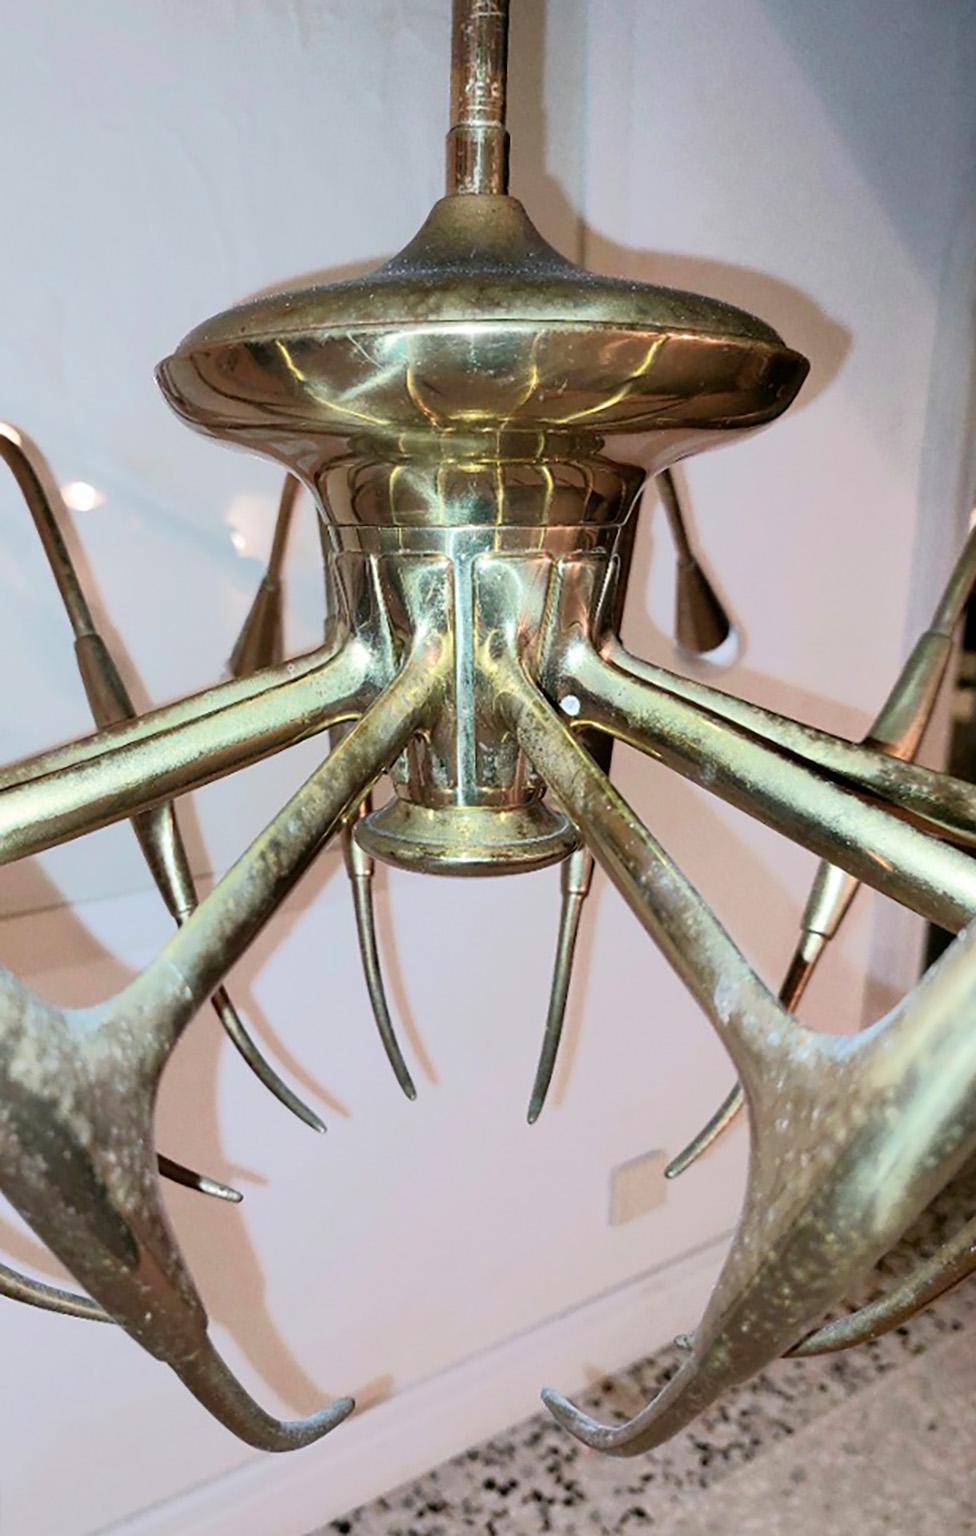 Interesting and rare chandelier  mod. SpIder
entirely of brass in the shape of a Spider,
 designed by Oscar Torlasco for the LUMI manufacture in Milan in the 1950s and 60s.
Good genetal conditions. With original brass Patina  which can be polished,